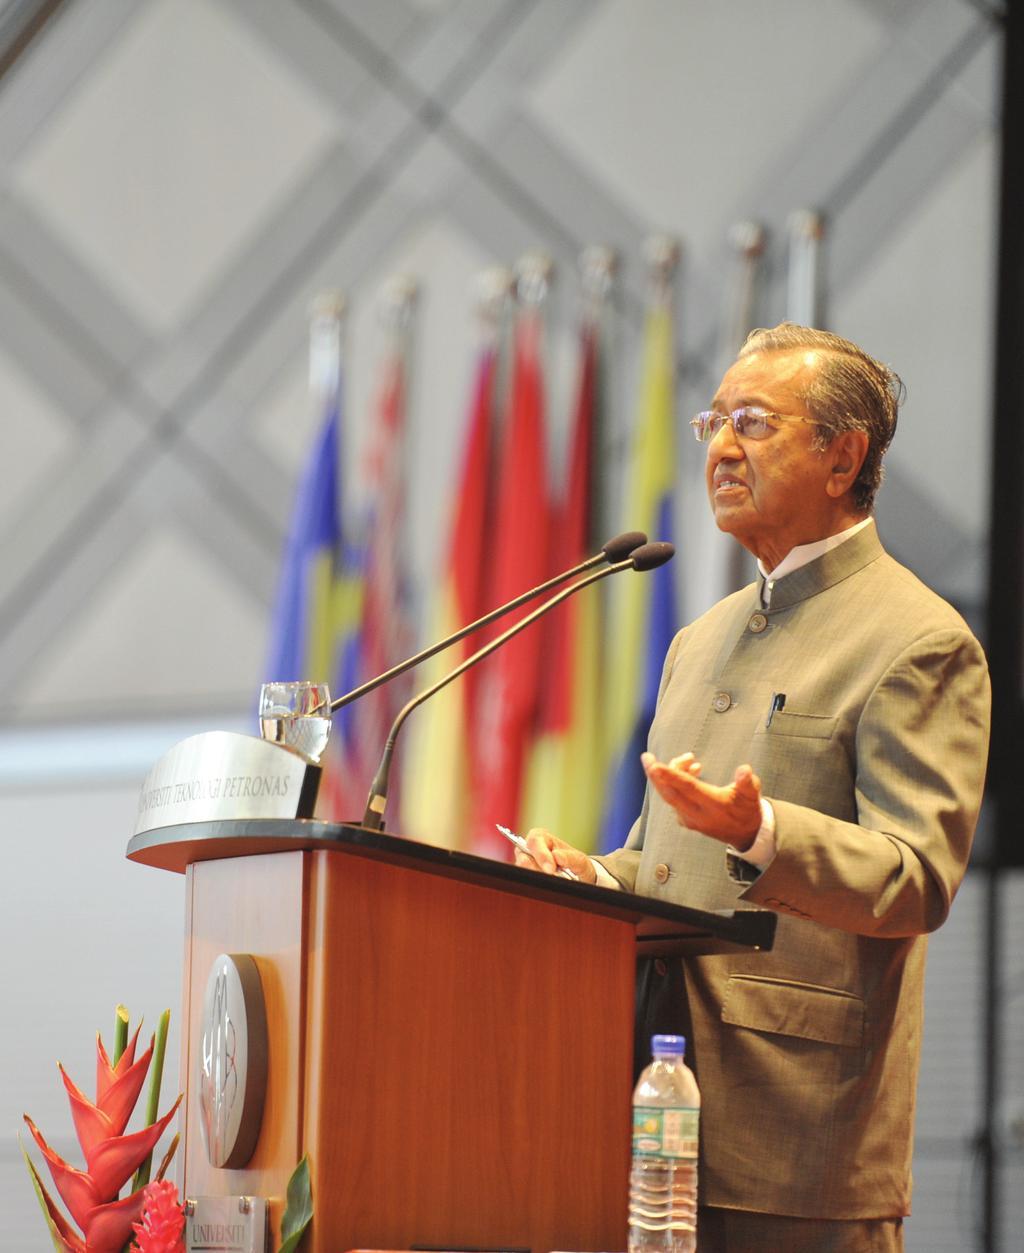 Compendium of UTP Public Lectures Leaders In Today's Society: Issues, Challenges And Way Forward LEADERS IN TODAY'S SOCIETY: ISSUES, CHALLENGES AND WAY FORWARD 16 April 2014 F irstly, I would like to